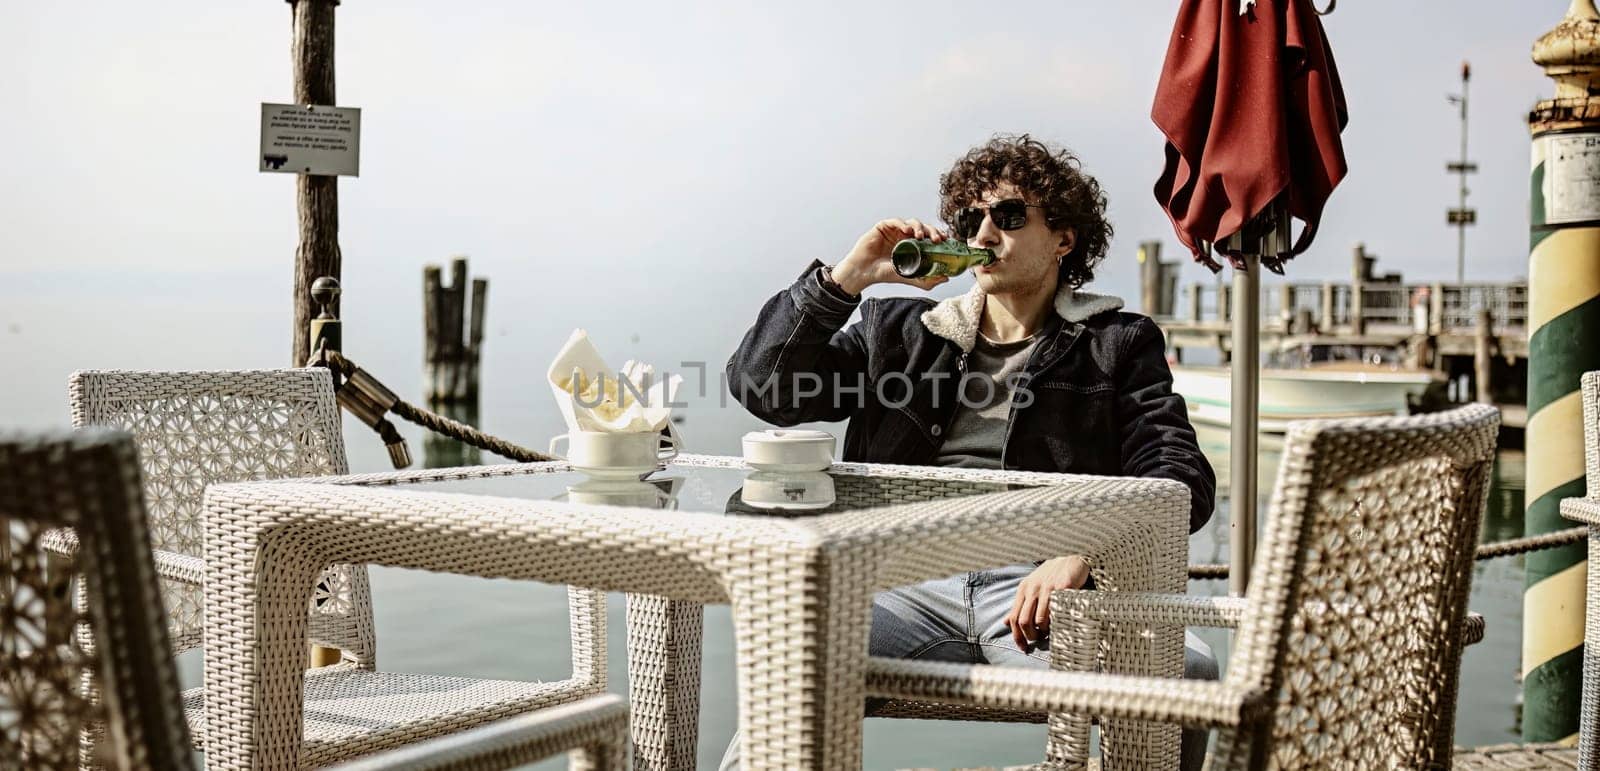 A solitary young man sitting at a bar table on a pier, looking melancholic while drinking a beer.